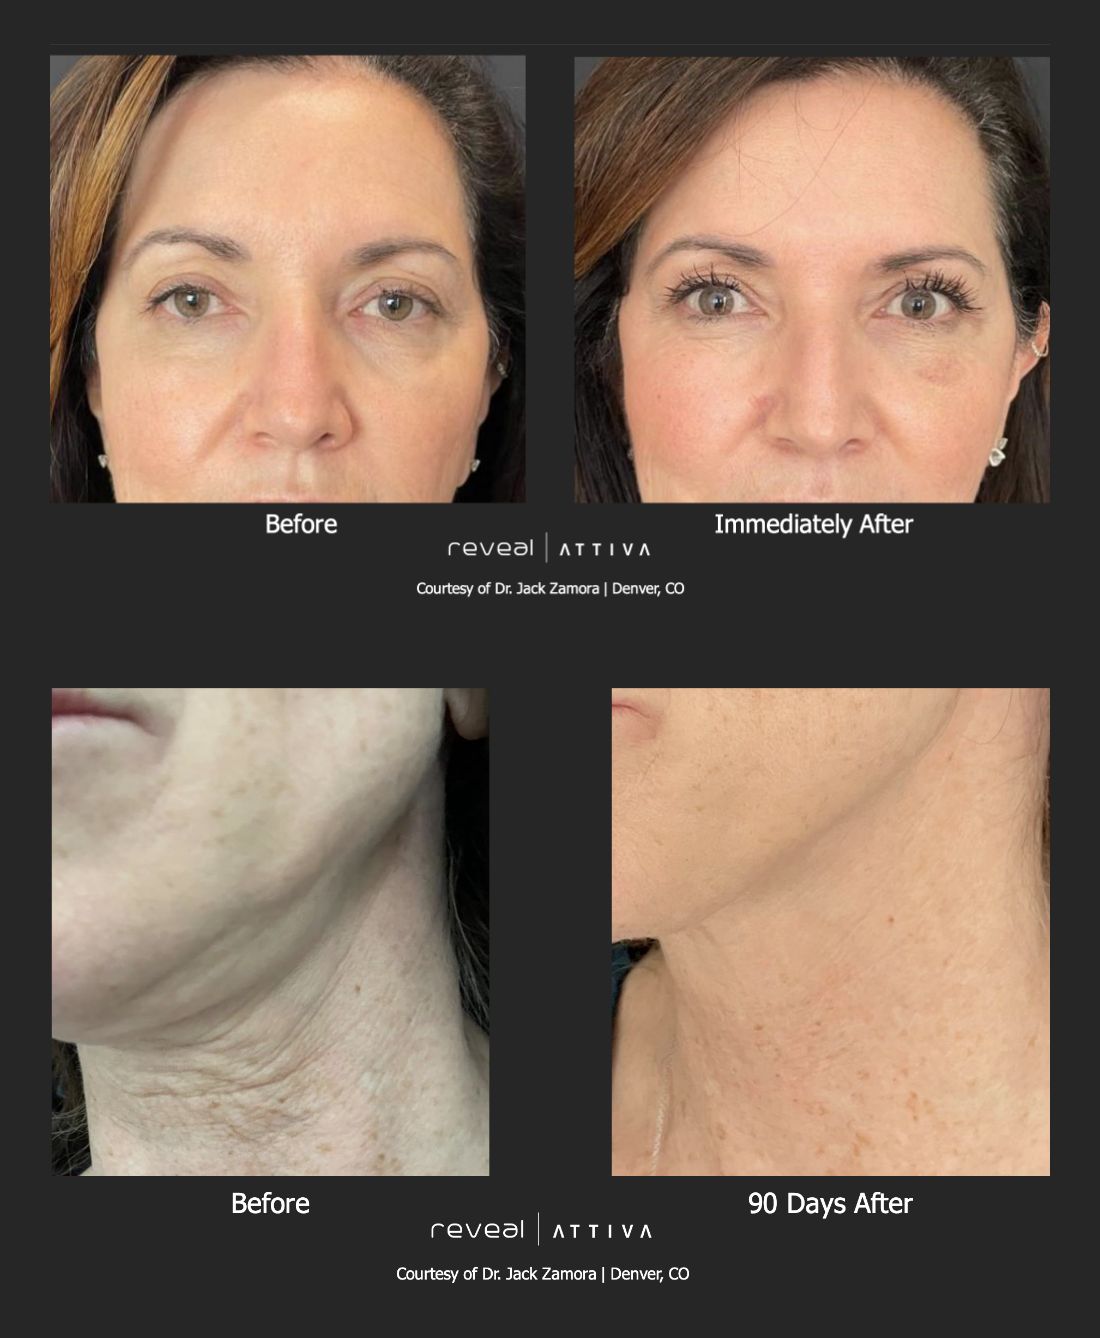 Before and After Attiva RF treatment